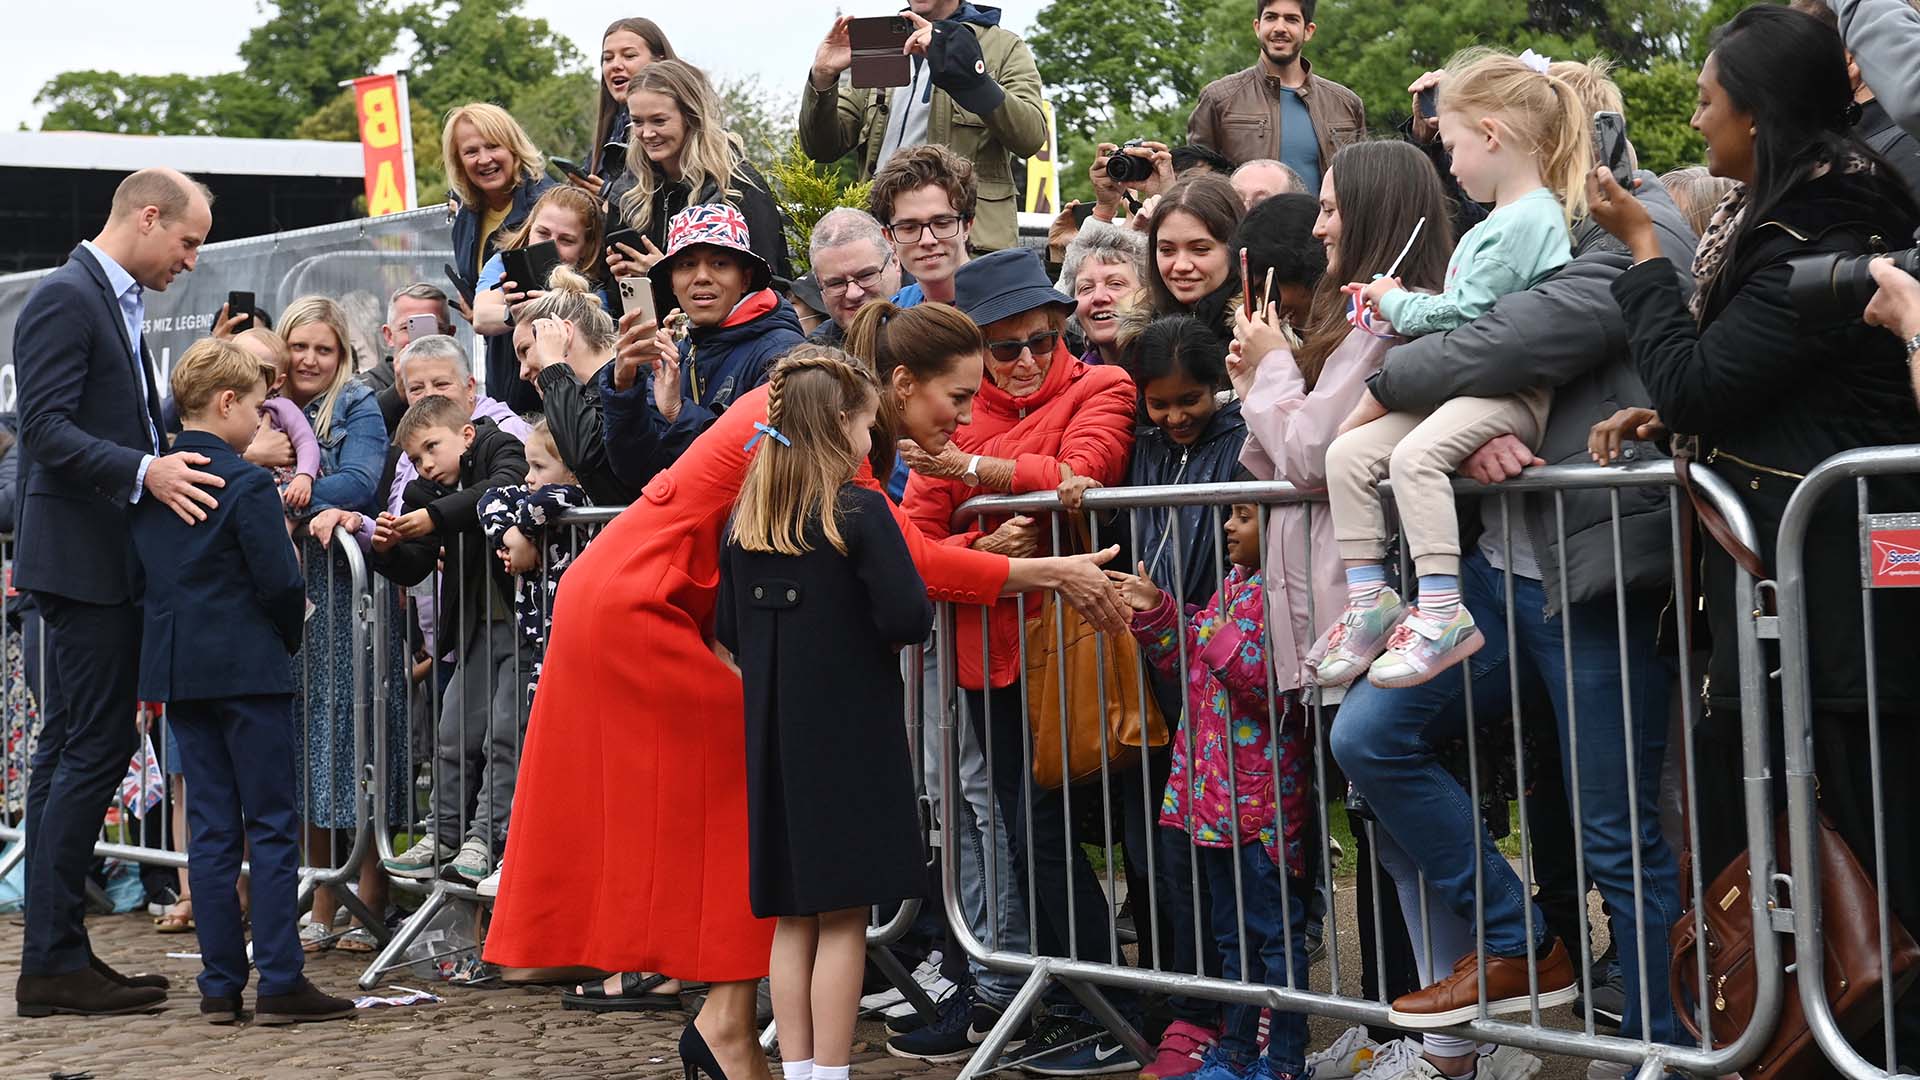 The Duke and Duchess of Cambridge, Prince George and Princess Charlotte meet well wishers during their visit to Cardiff Castle to meet performers and crew involved in the Platinum Jubilee Celebration Concert taking place in the castle grounds later in the afternoon, as members of the royal family visit the nations of the UK to celebrate Queen Elizabeth II’s Platinum Jubilee. Picture date: Saturday June 4, 2022.